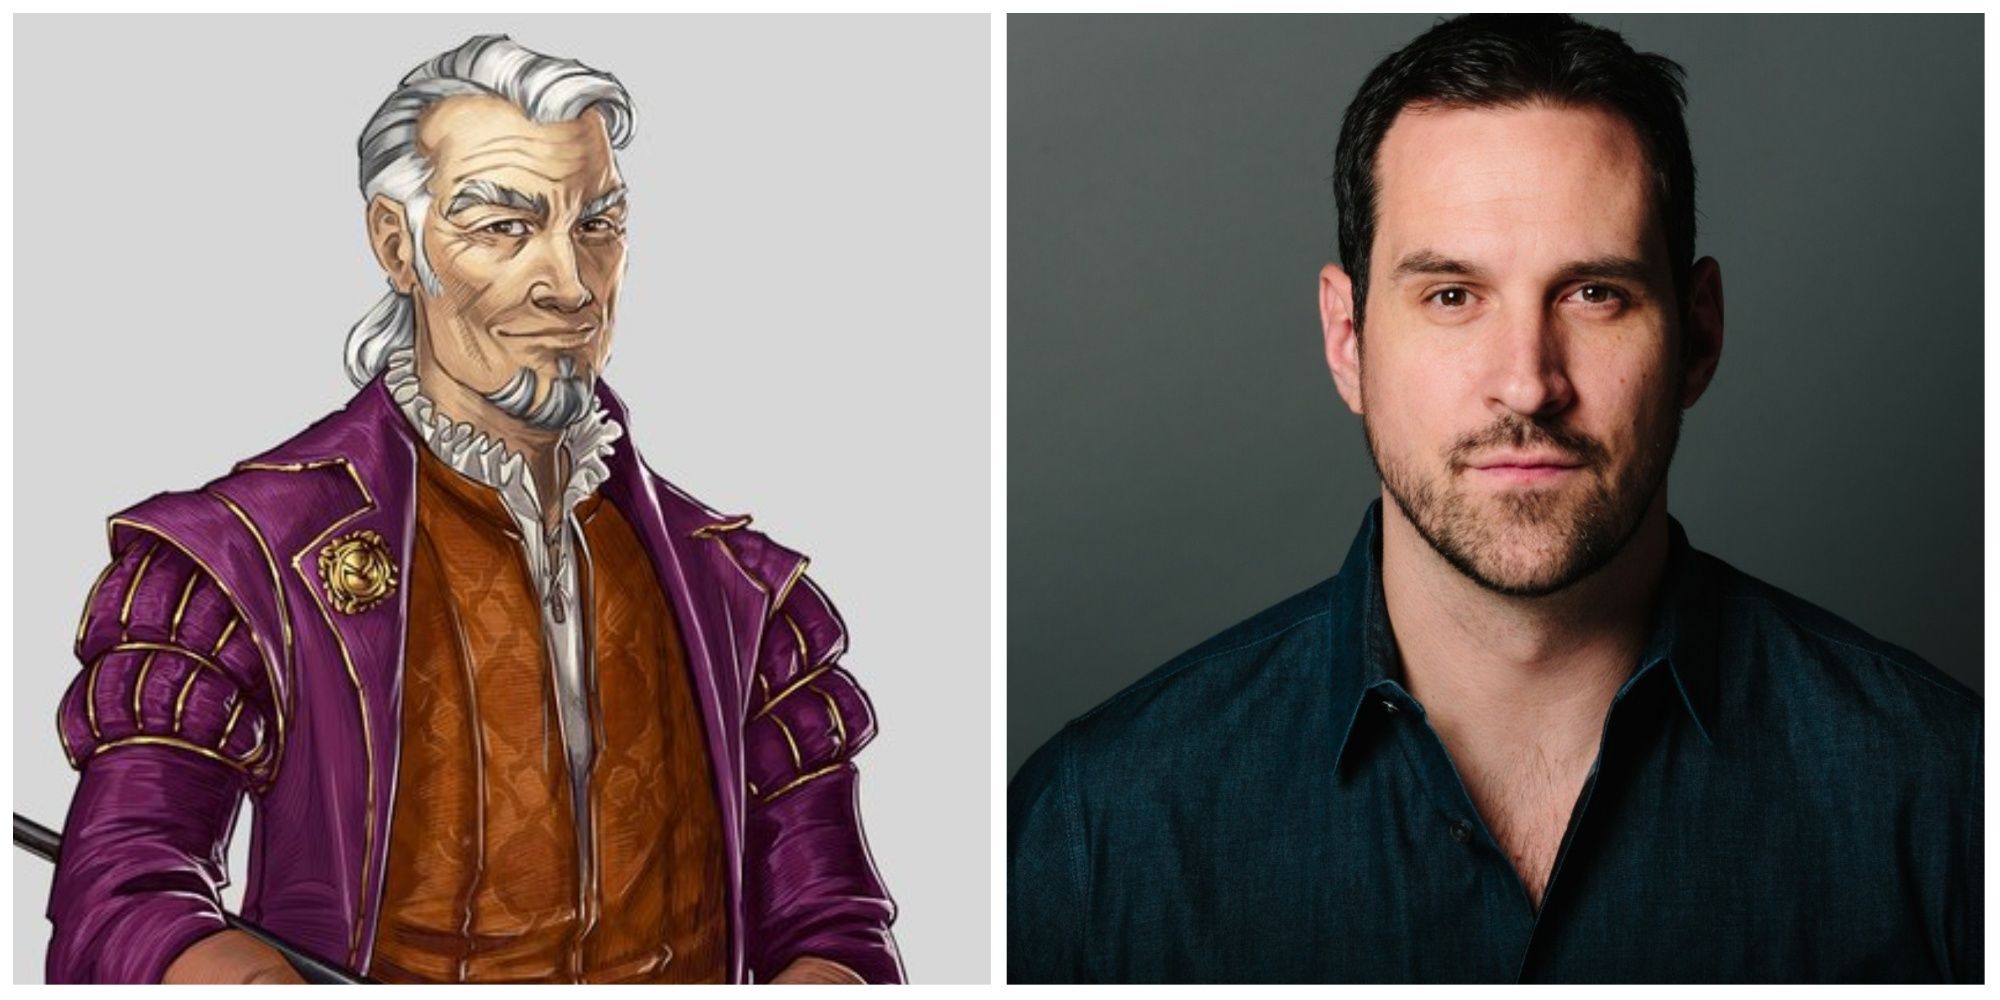 Critical Role, Betrand Bell on the left and Travis Willingham on the right